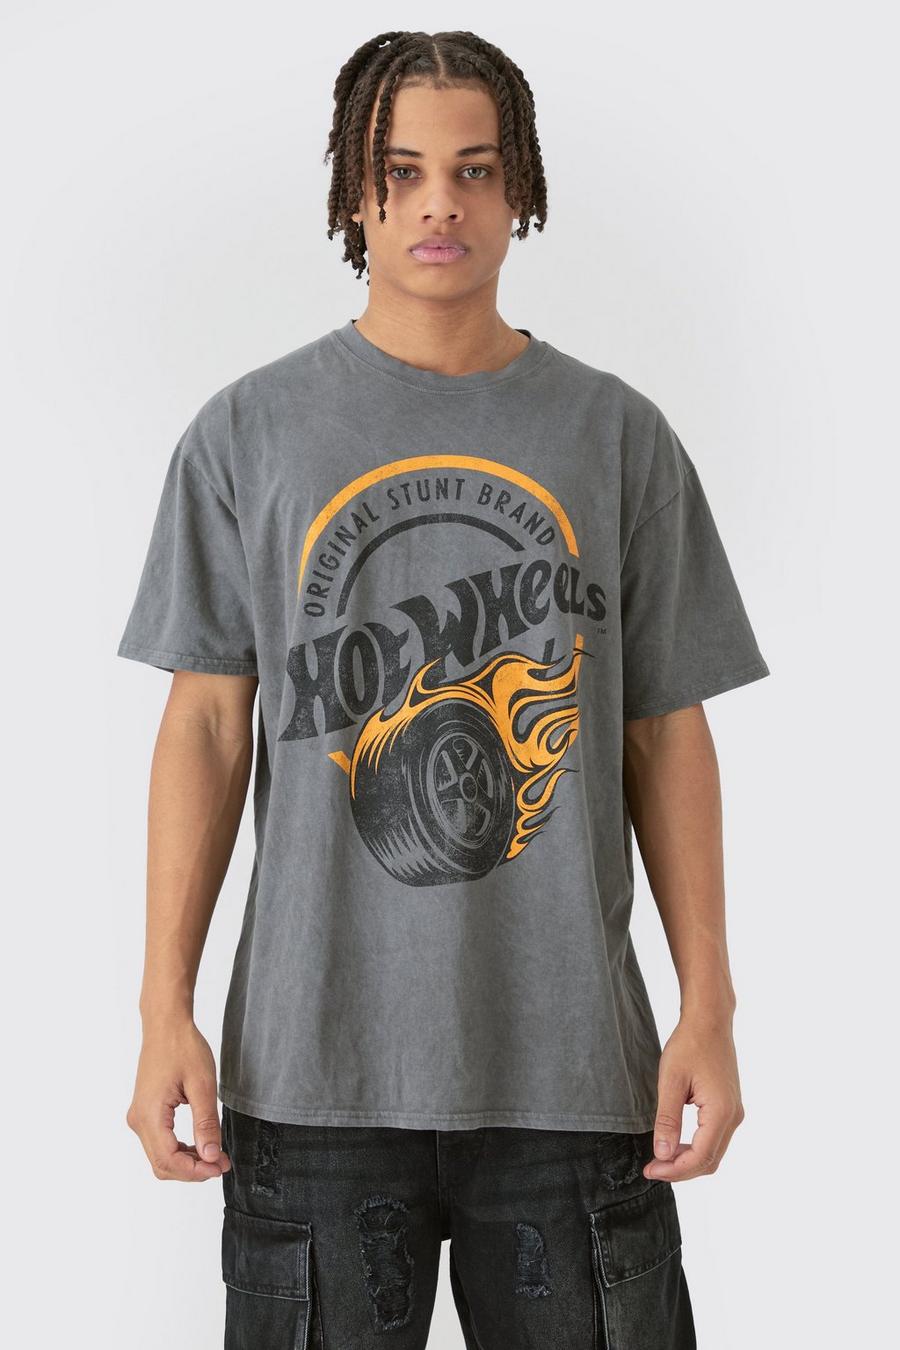 T-shirt oversize ufficiale Hotwheels in lavaggio, Charcoal image number 1